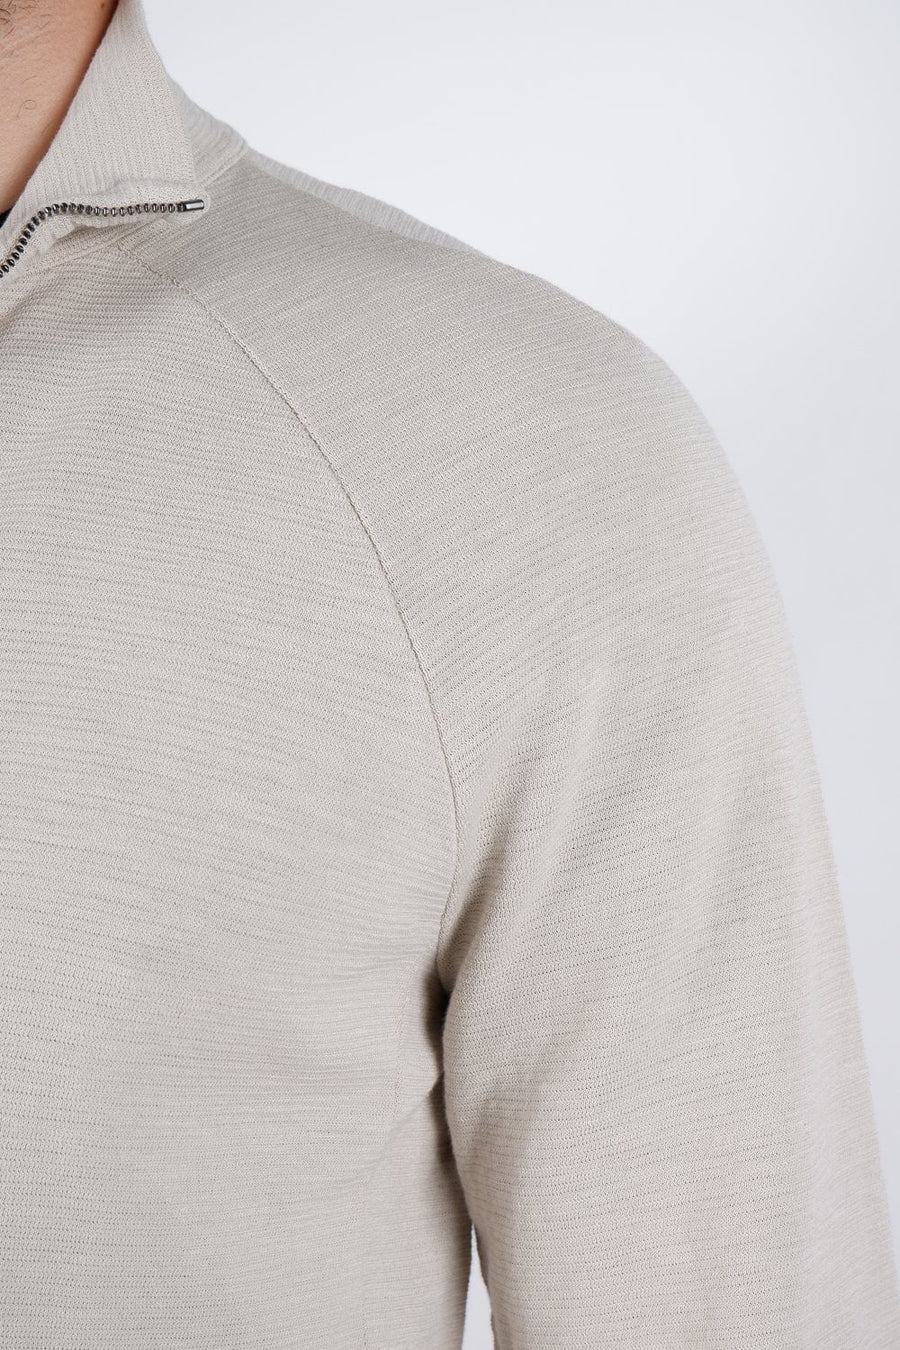 Buy the Transit Zip-Up Textured Sweatshirt in Beige at Intro. Spend £50 for free UK delivery. Official stockists. We ship worldwide.